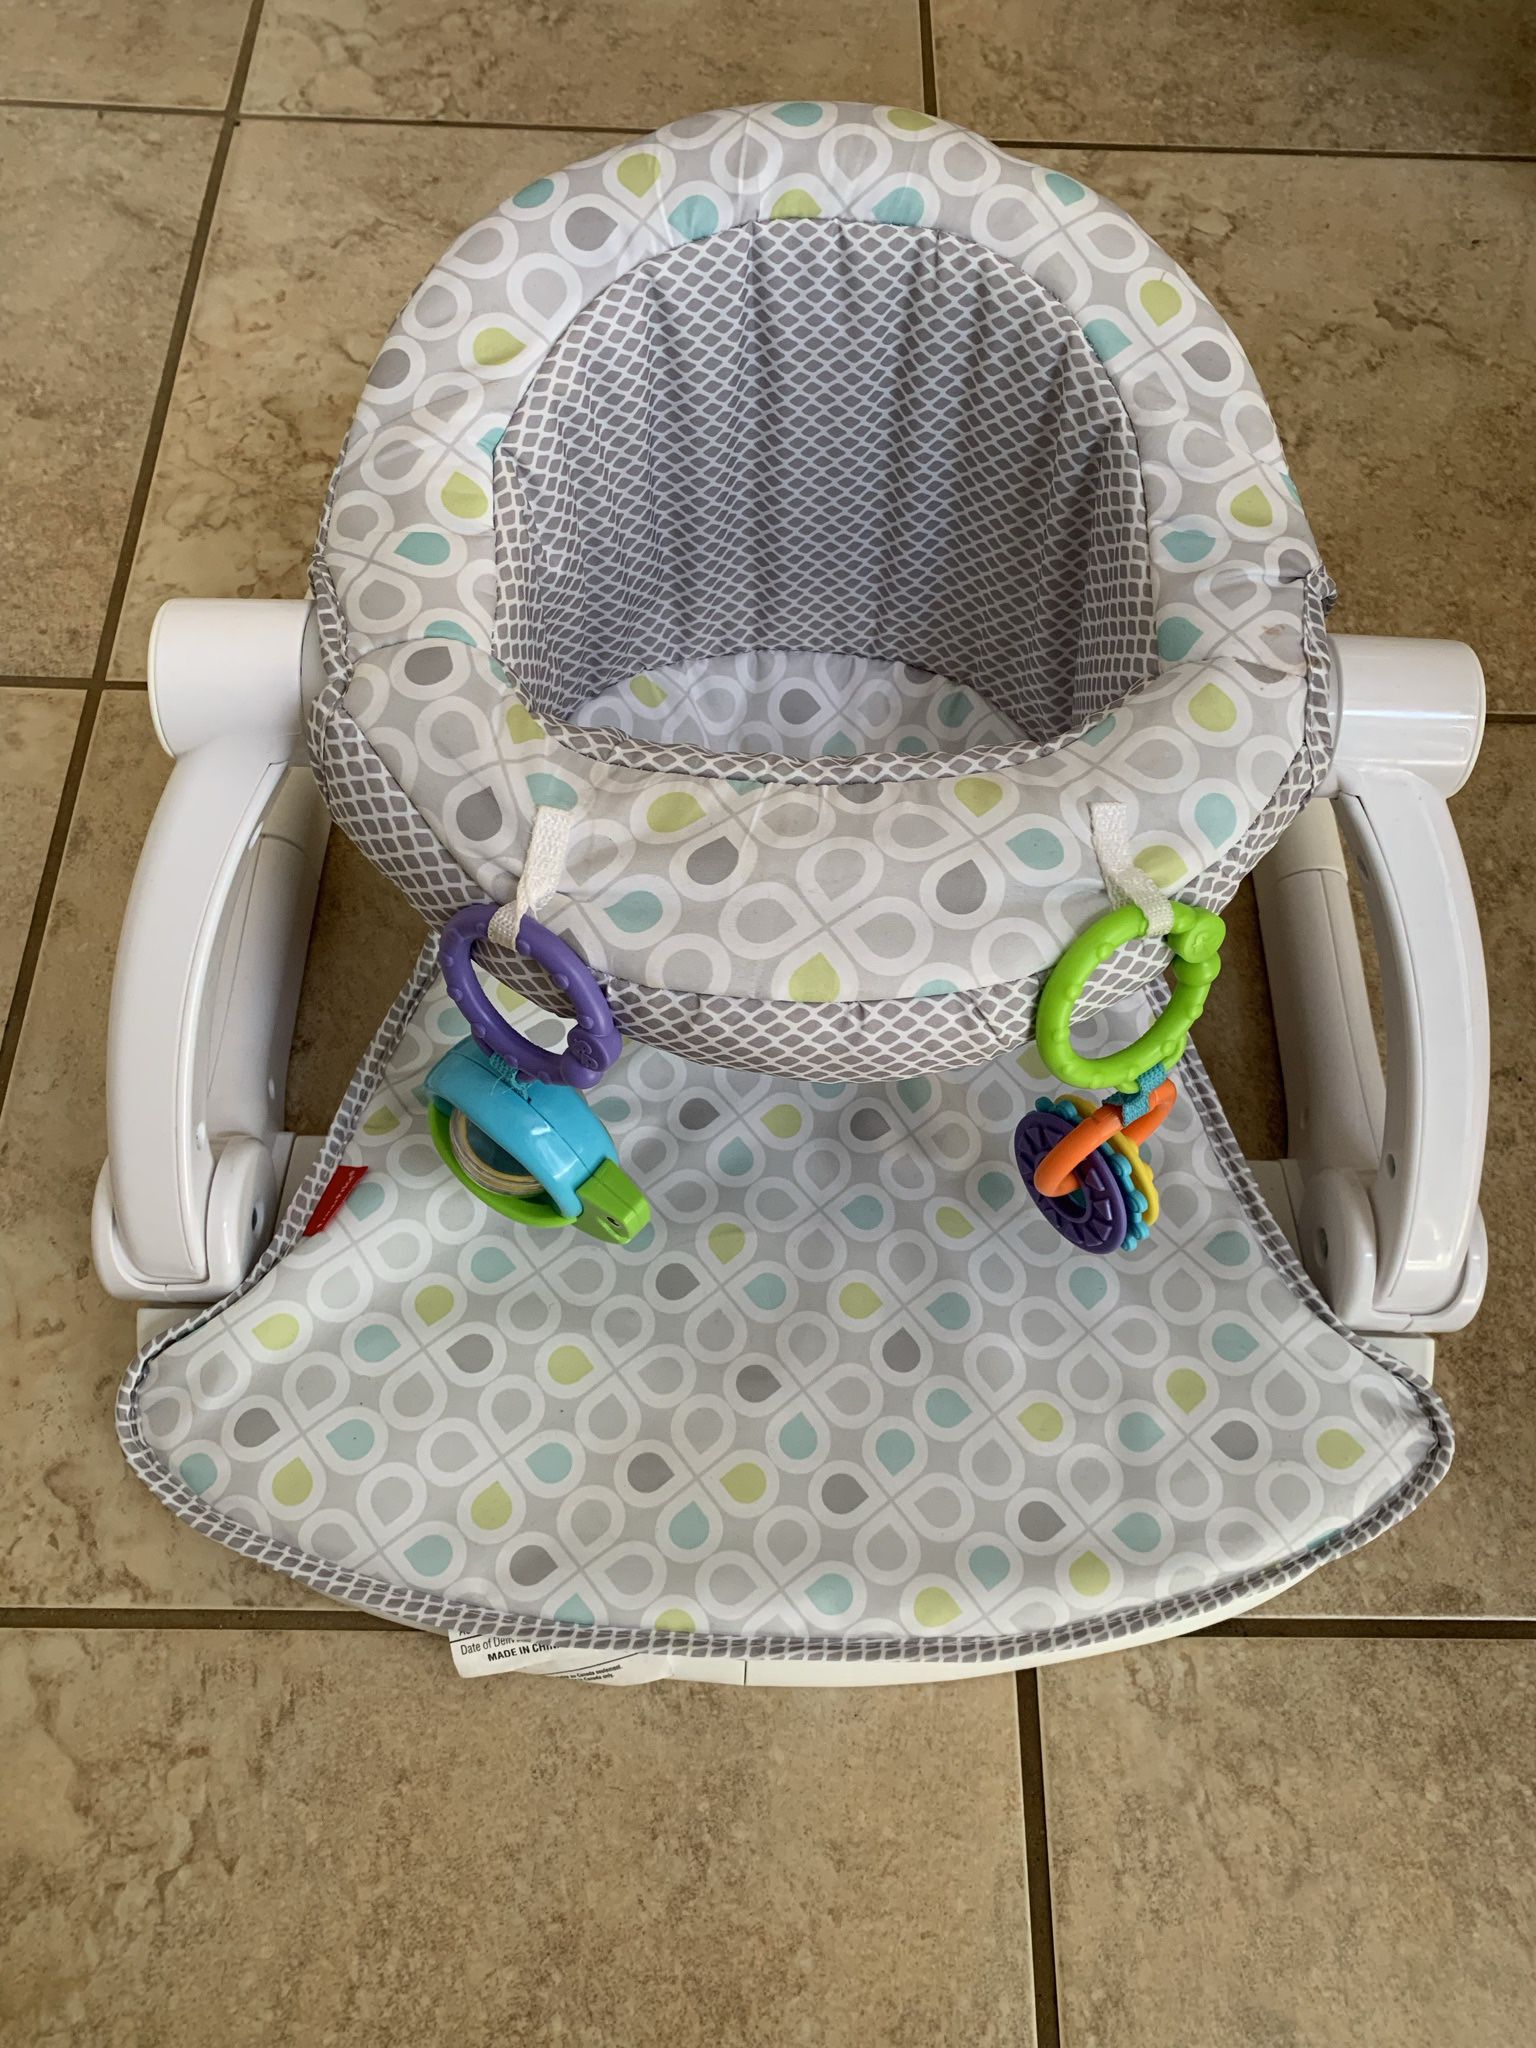 Infant Newborn Swing Bassinet And Chair 